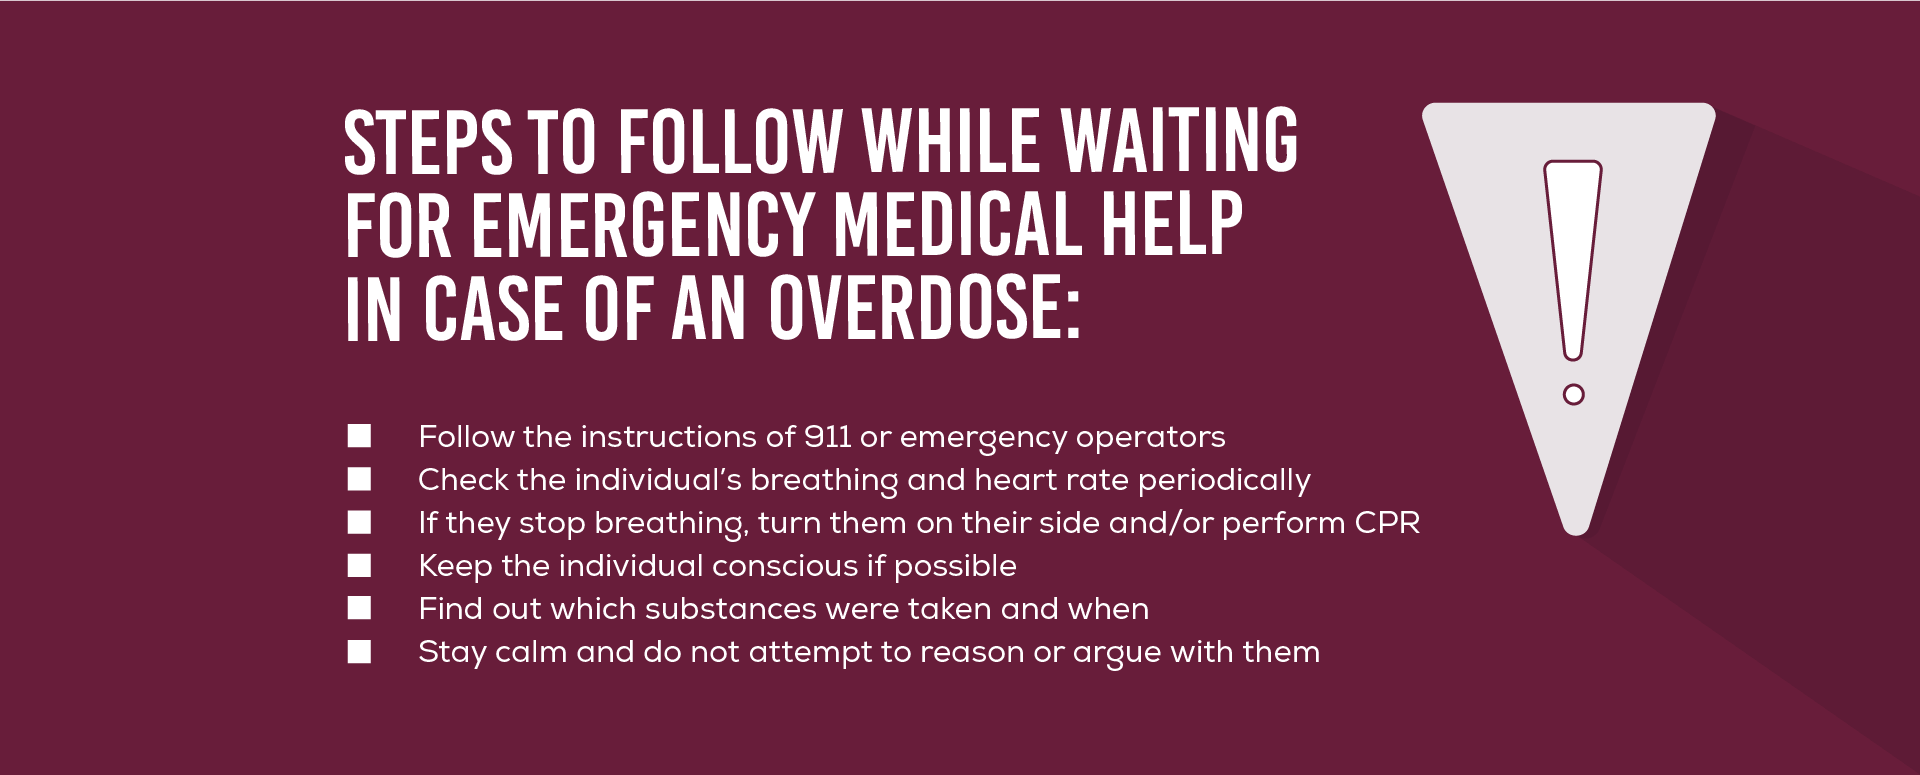 Steps to Follow in Case Of Overdose